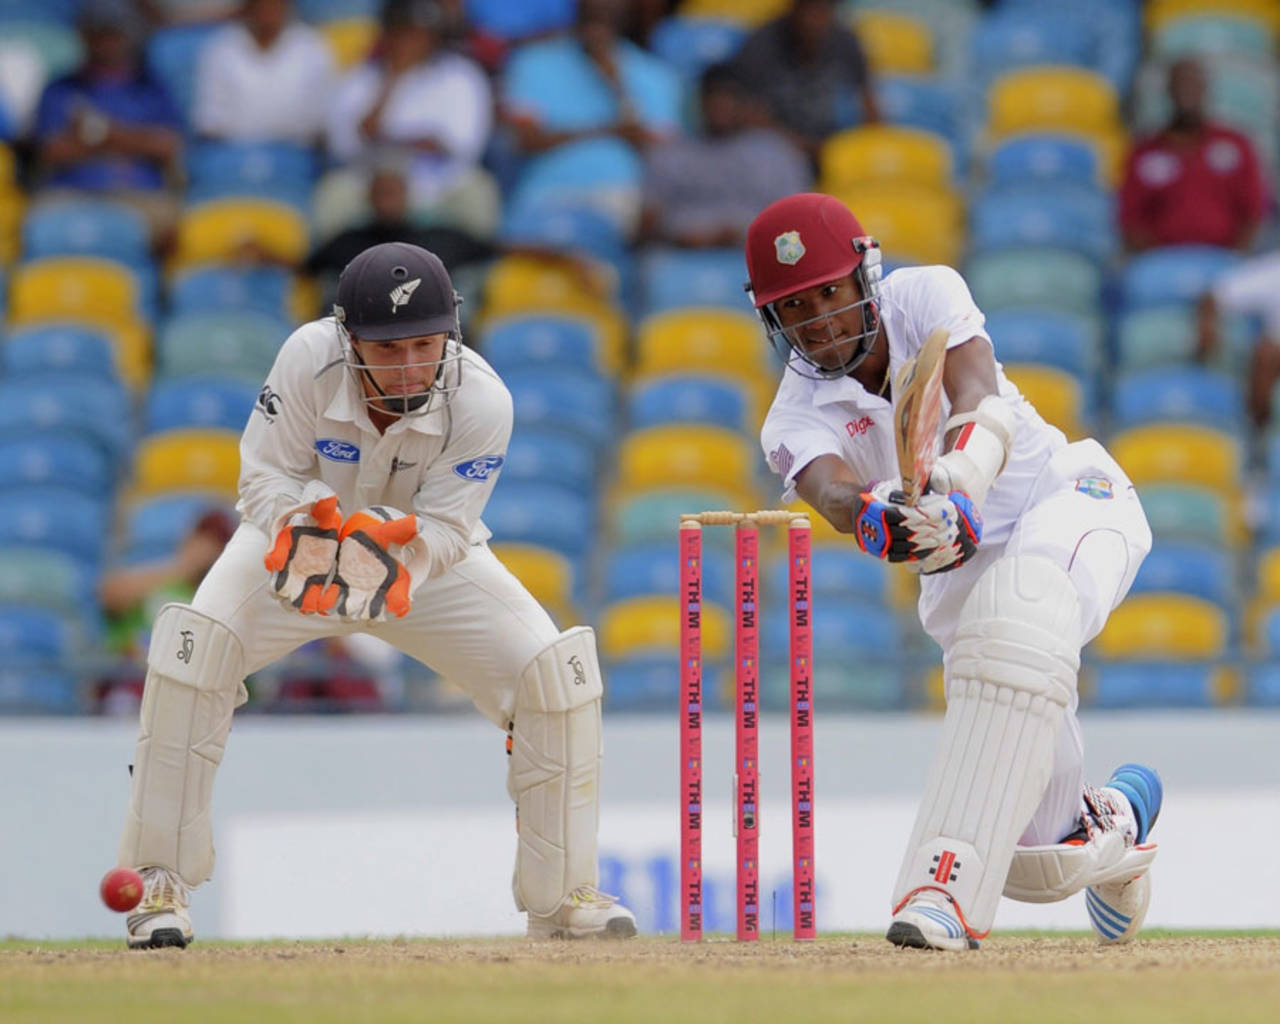 Man to man, there's not much to separate the two teams&nbsp;&nbsp;&bull;&nbsp;&nbsp;WICB